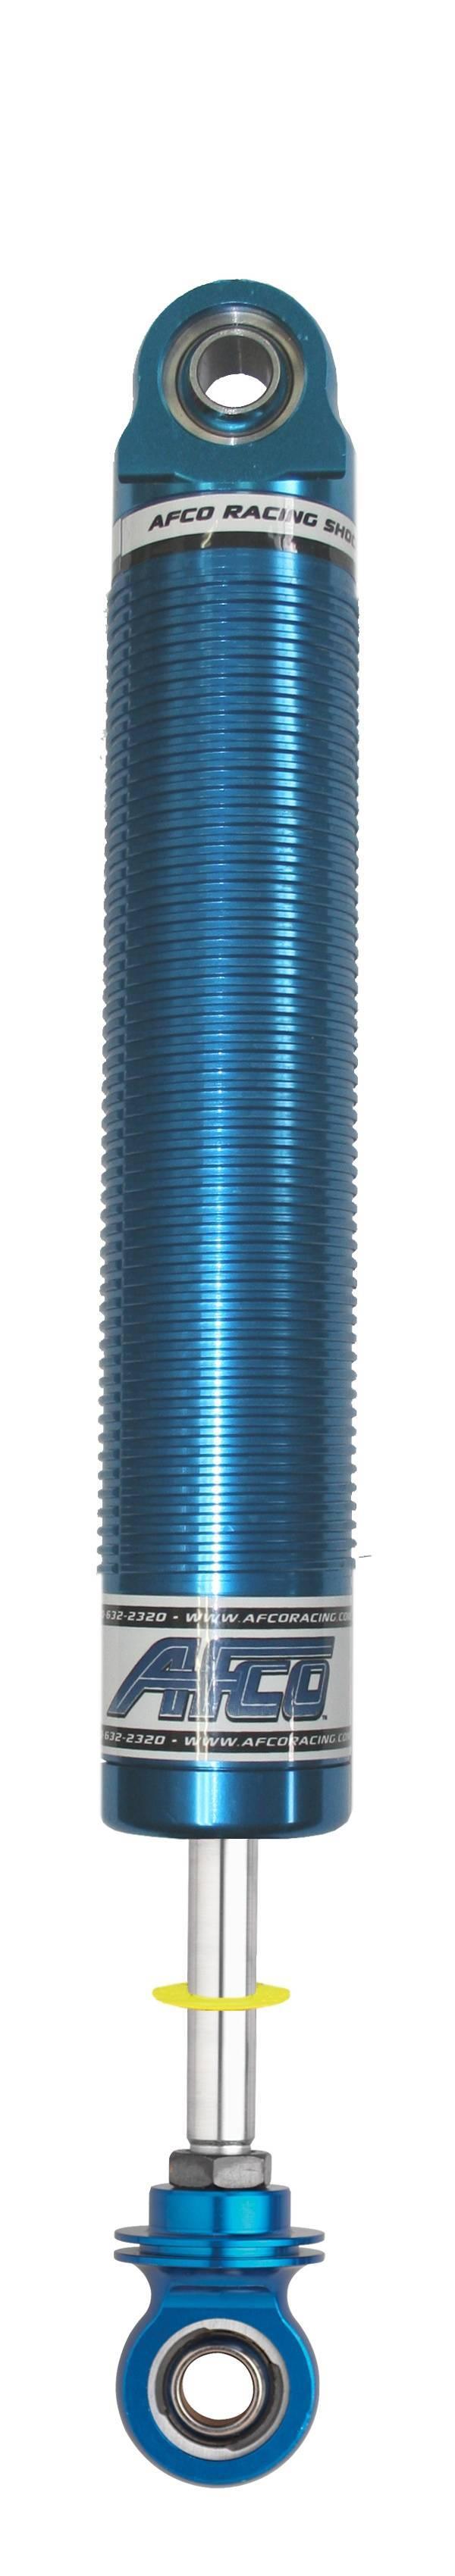 Shock Alum Small Body 6in Threaded - Burlile Performance Products